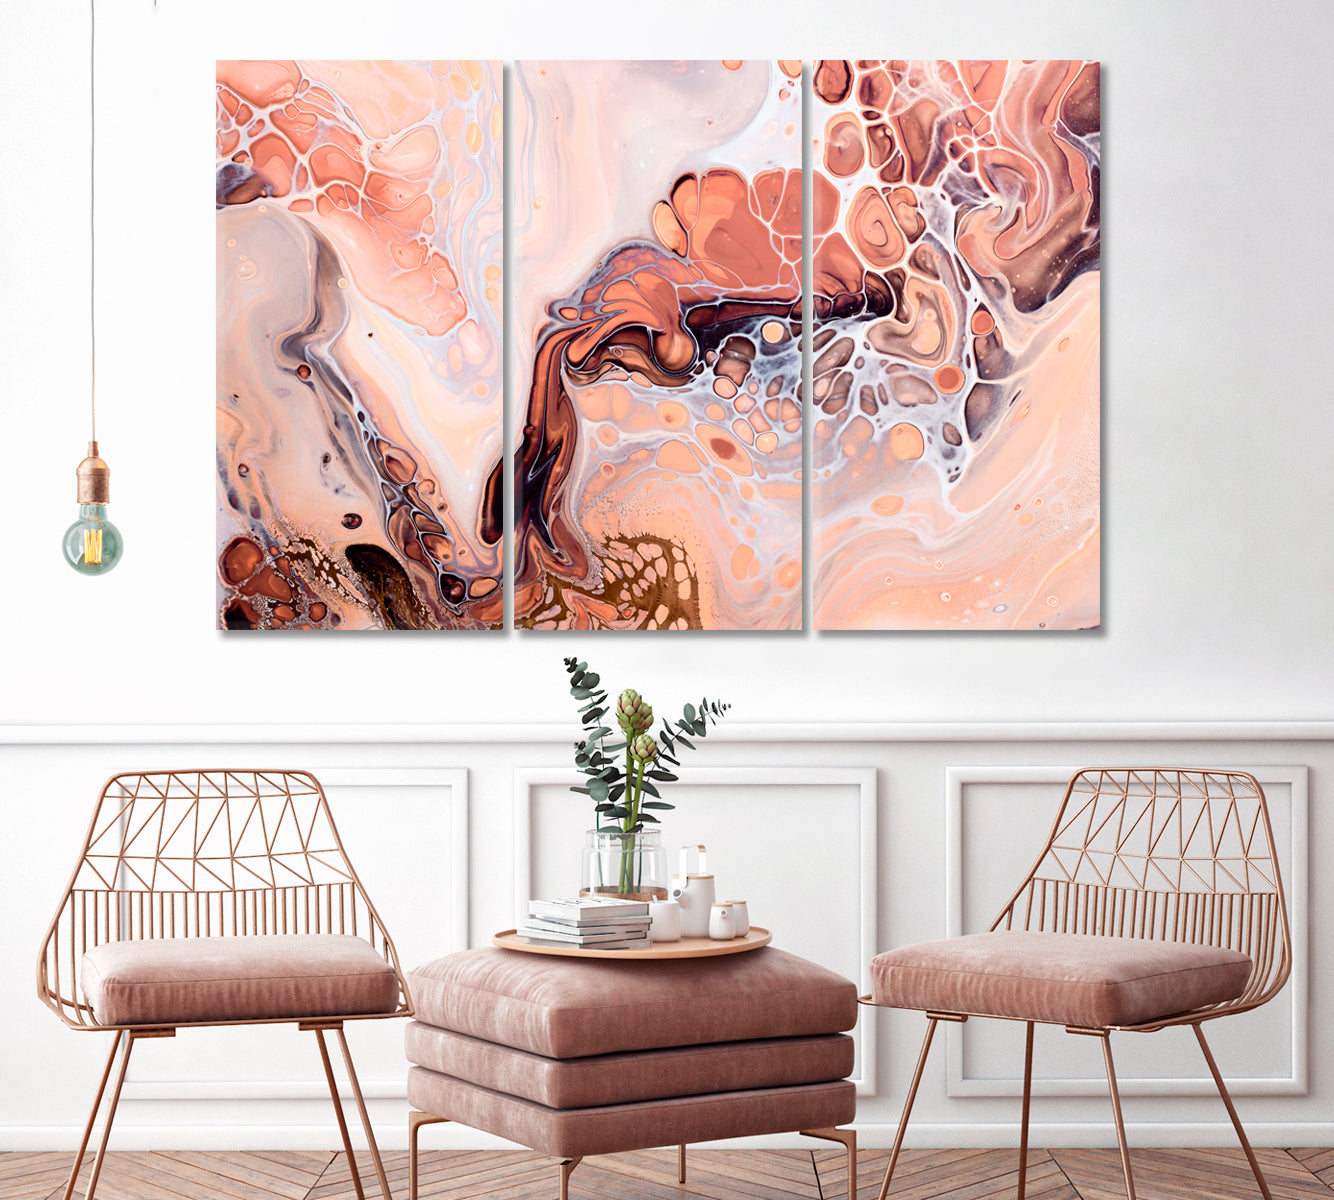 Pastel Colors Acrylic Bubbles Abstract Design Canvas Print ArtLexy 3 Panels 36"x24" inches 